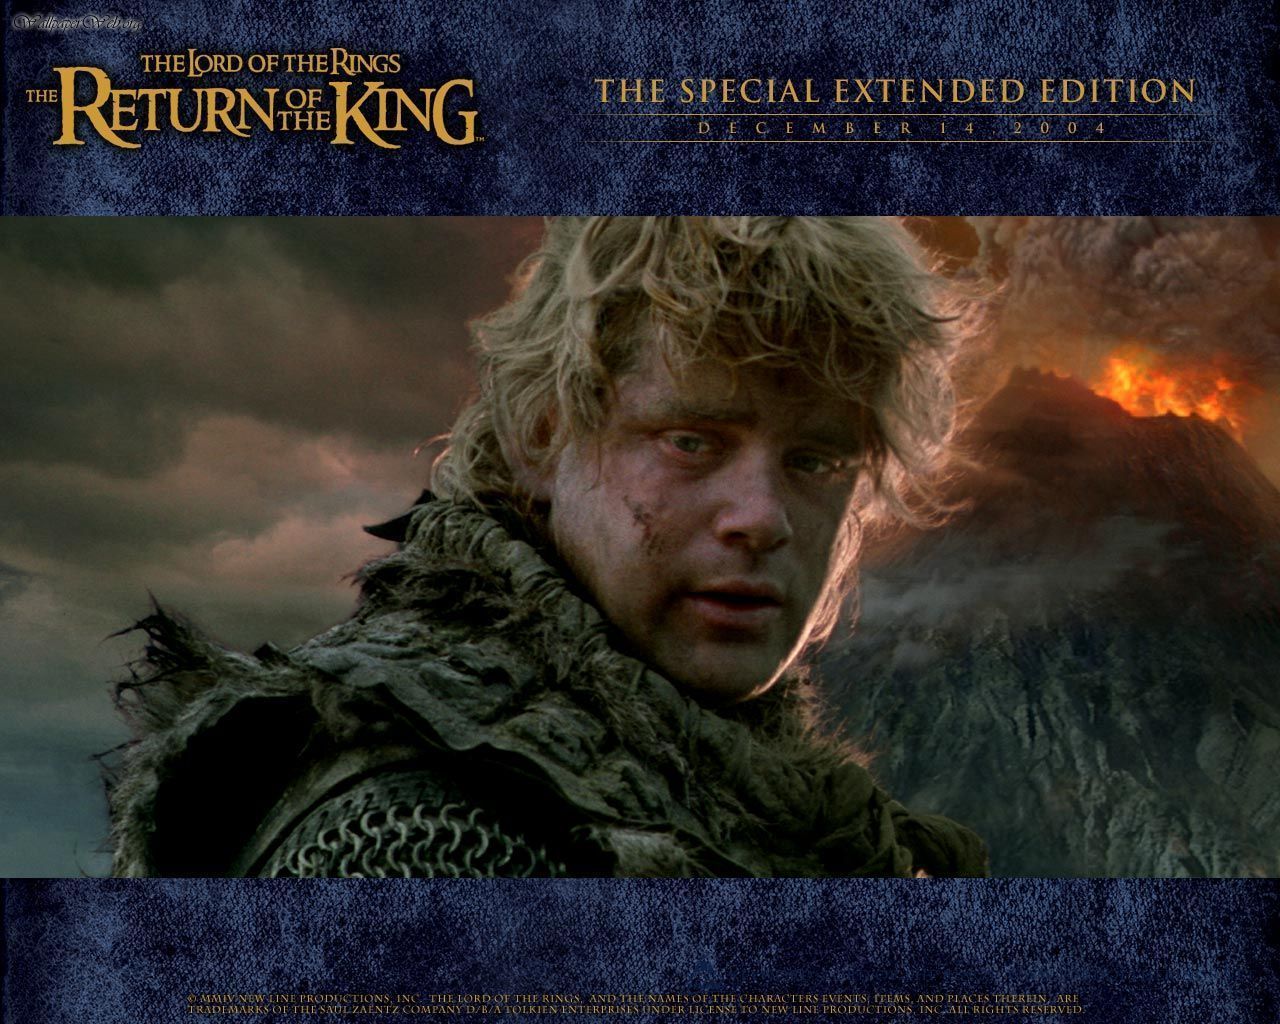 Samwise Gamgee, a Hobbit. Lord of the rings, The hobbit movies, Lord